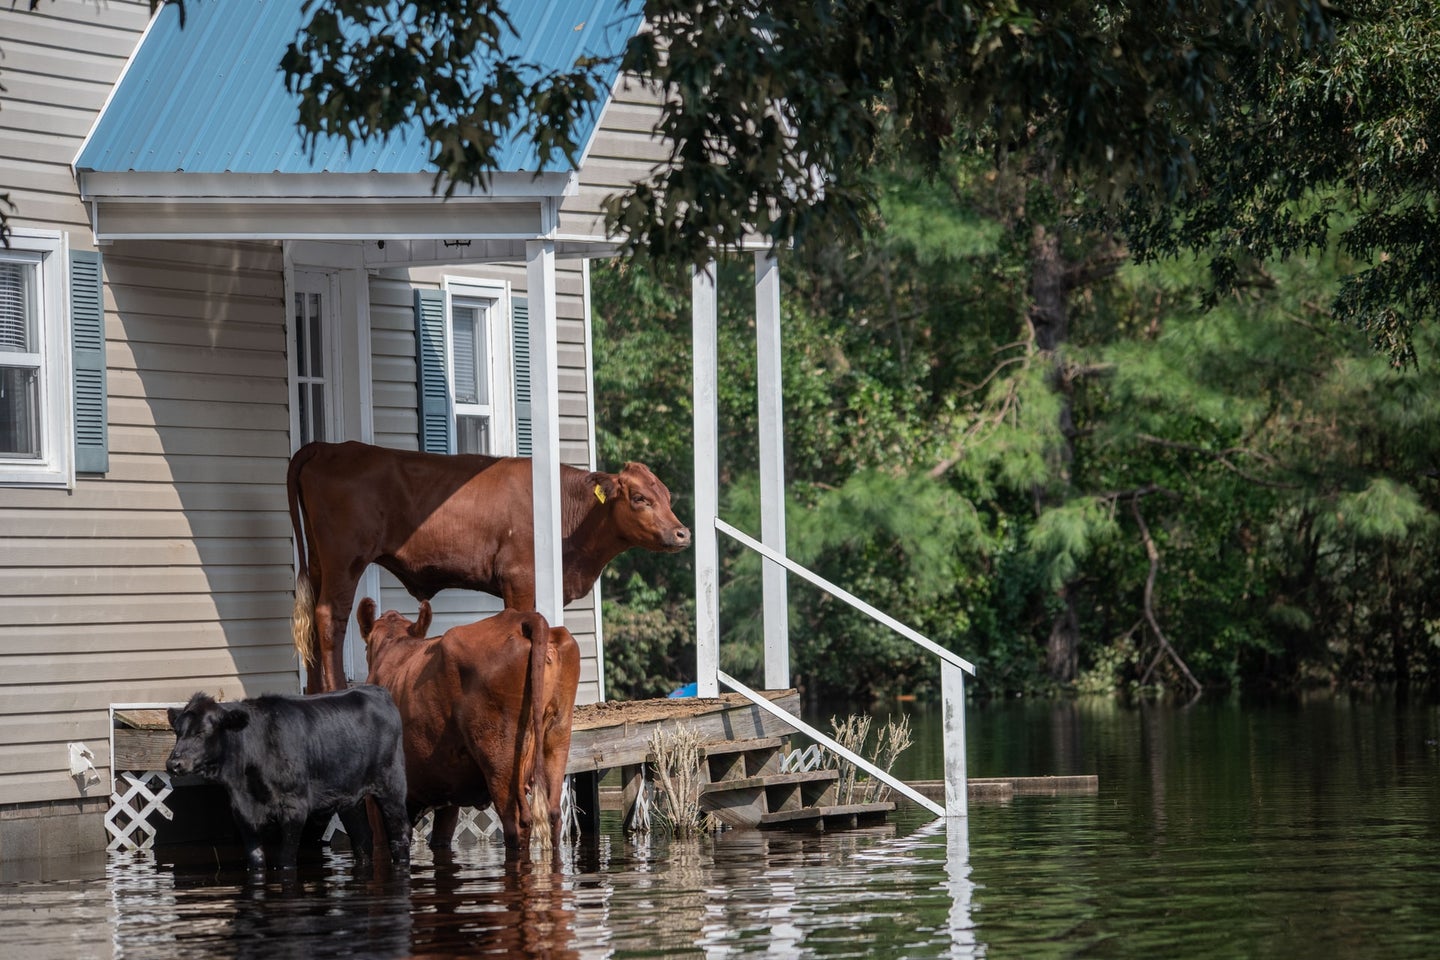 Three cows taking shelter near a house during a flash flood. A black one and a brown one are standing knee-deep in water, while a second brown one is standing on the porch.